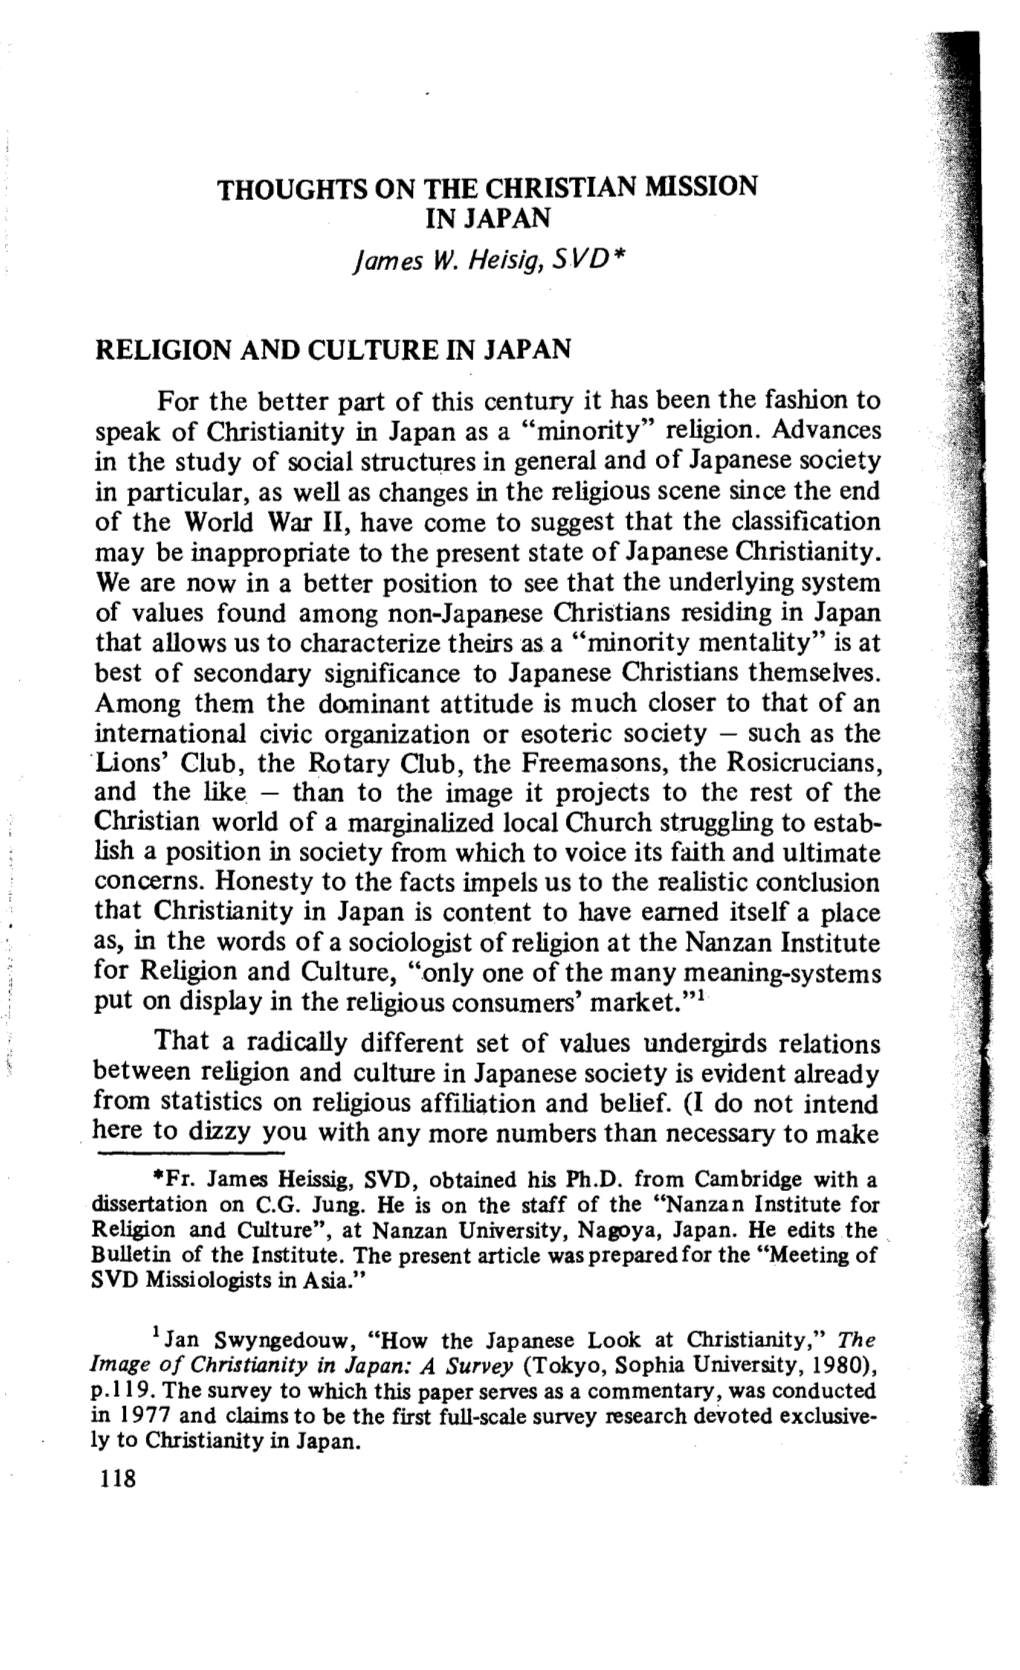 Thoughts on the Christian Mission in Japan